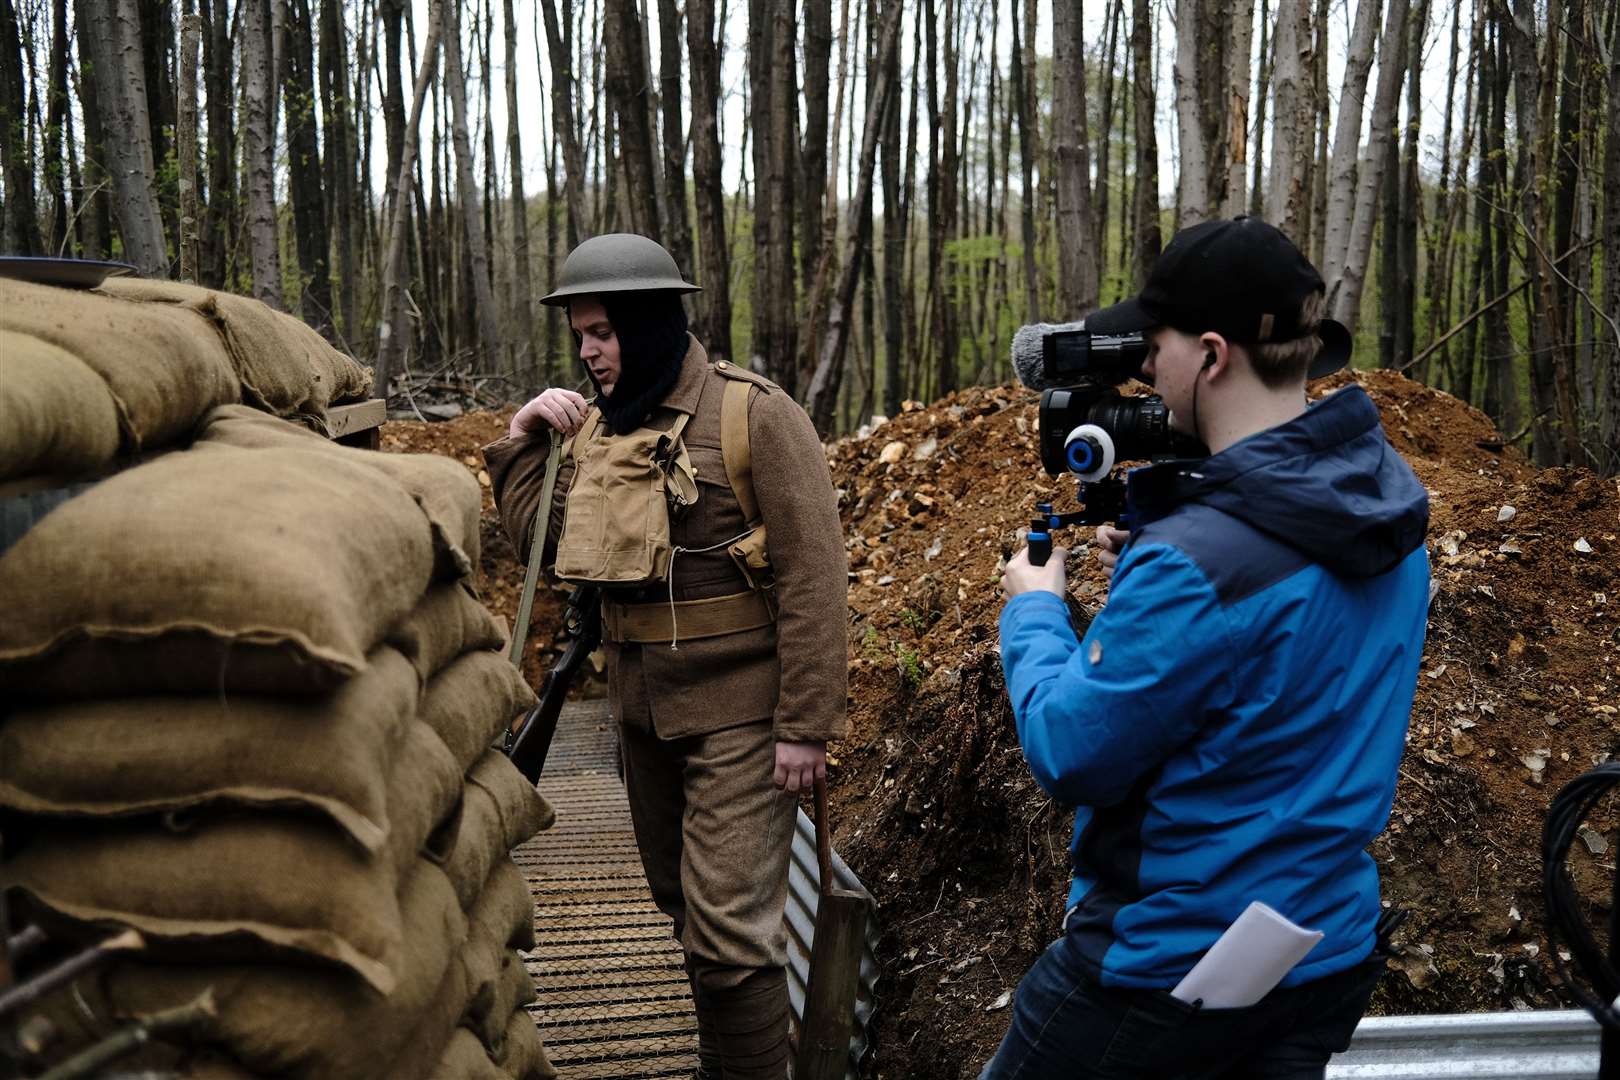 Behind the scenes of Thomas Gardner's debut production, The Fronts of War, which was filmed on site